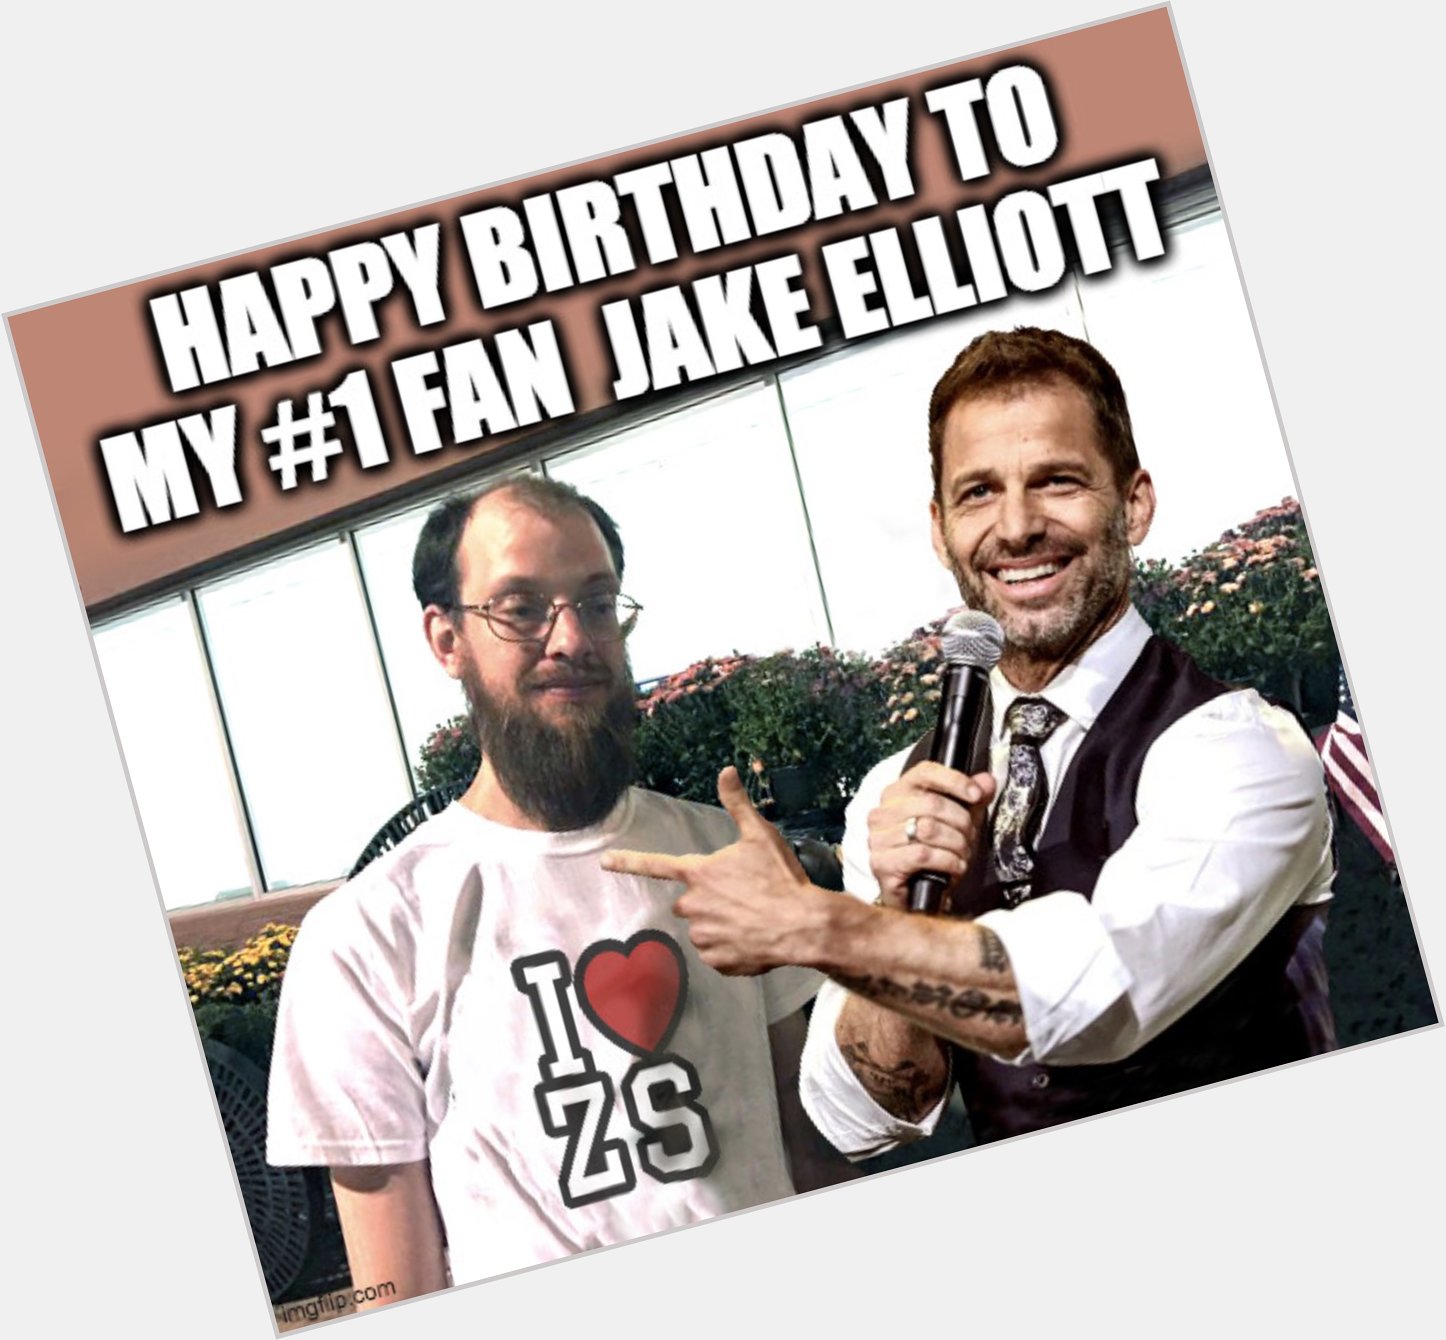 Zack Snyder went all out this year to wish his fan Jake a Happy Birthday!   